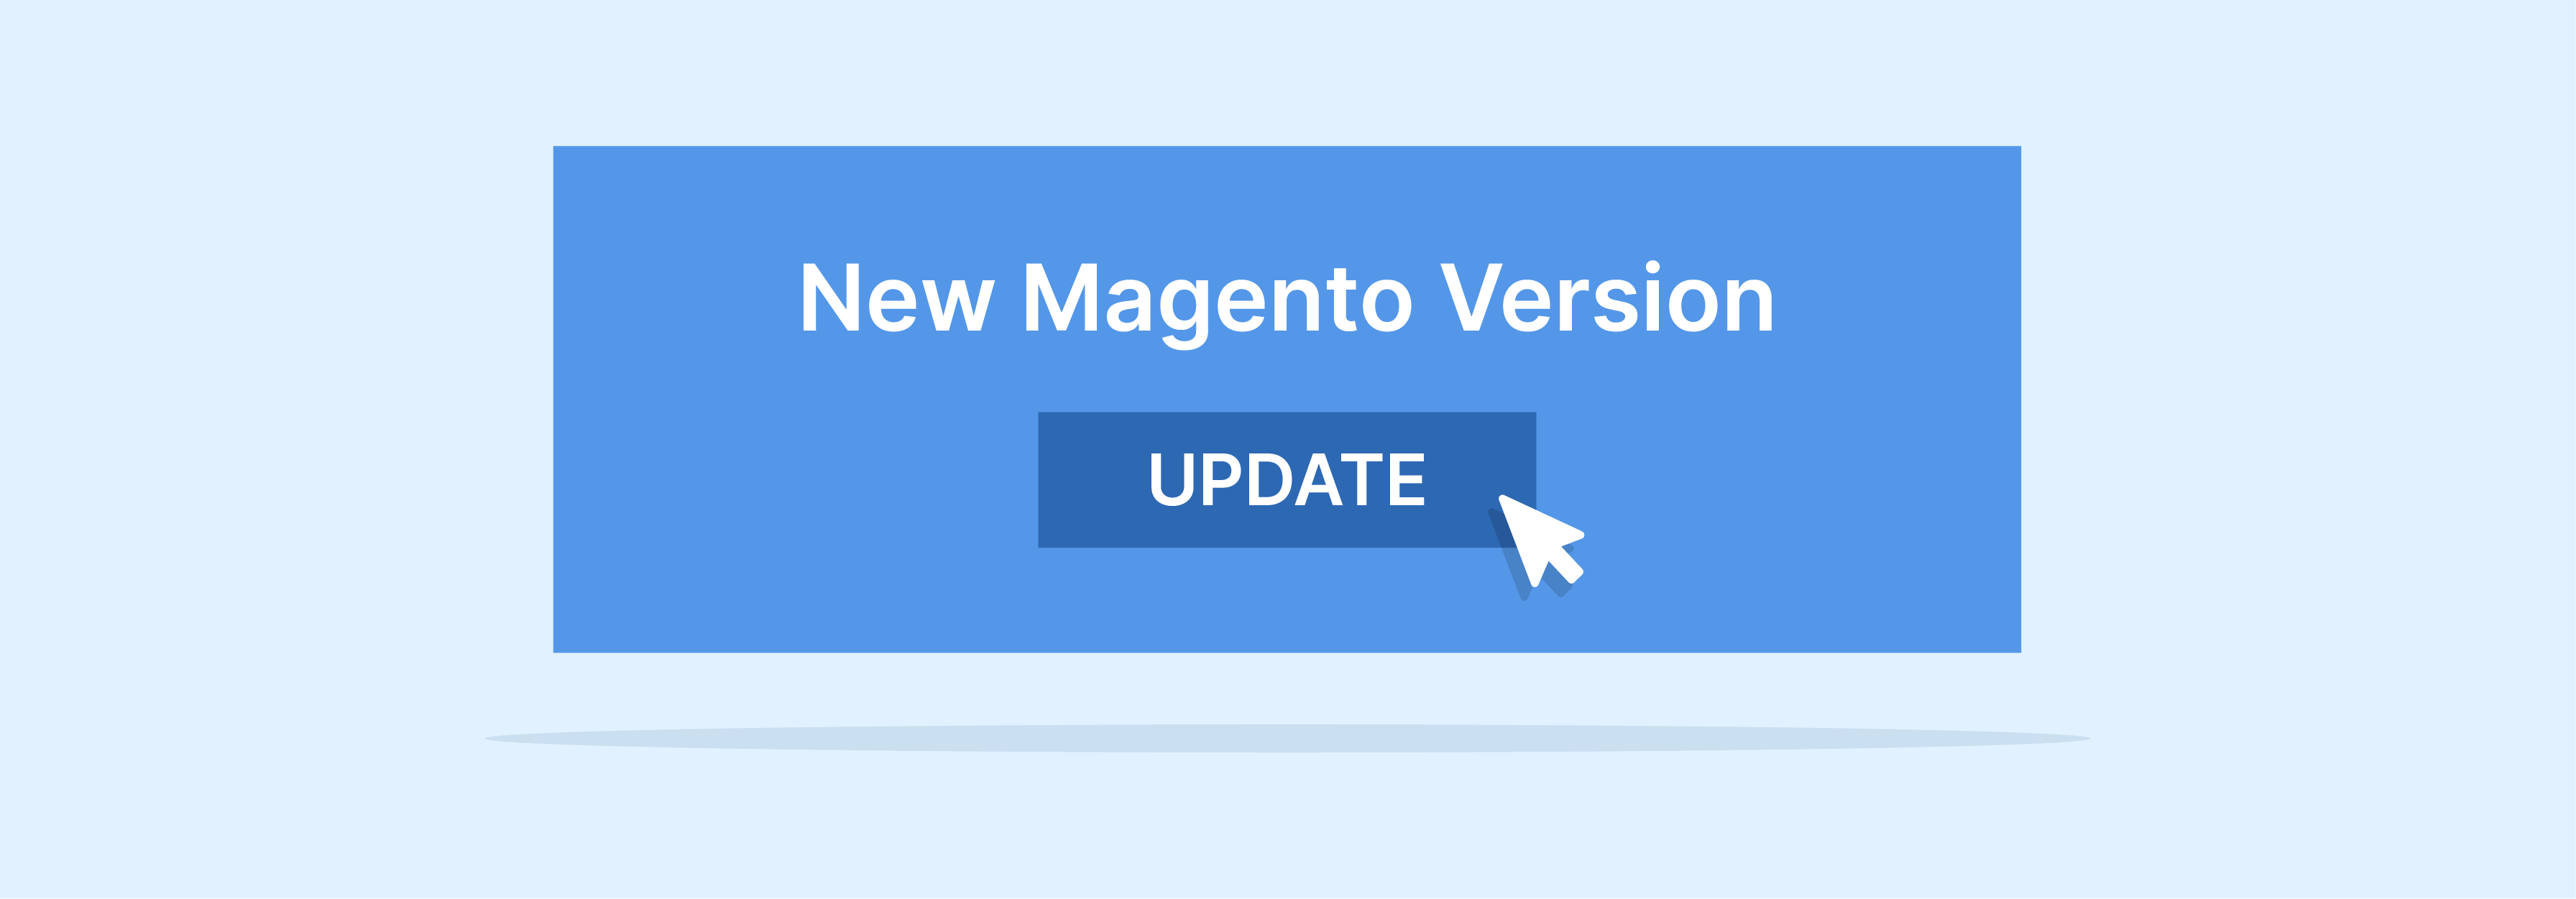 Upgrading to the latest Magento release for enhanced security